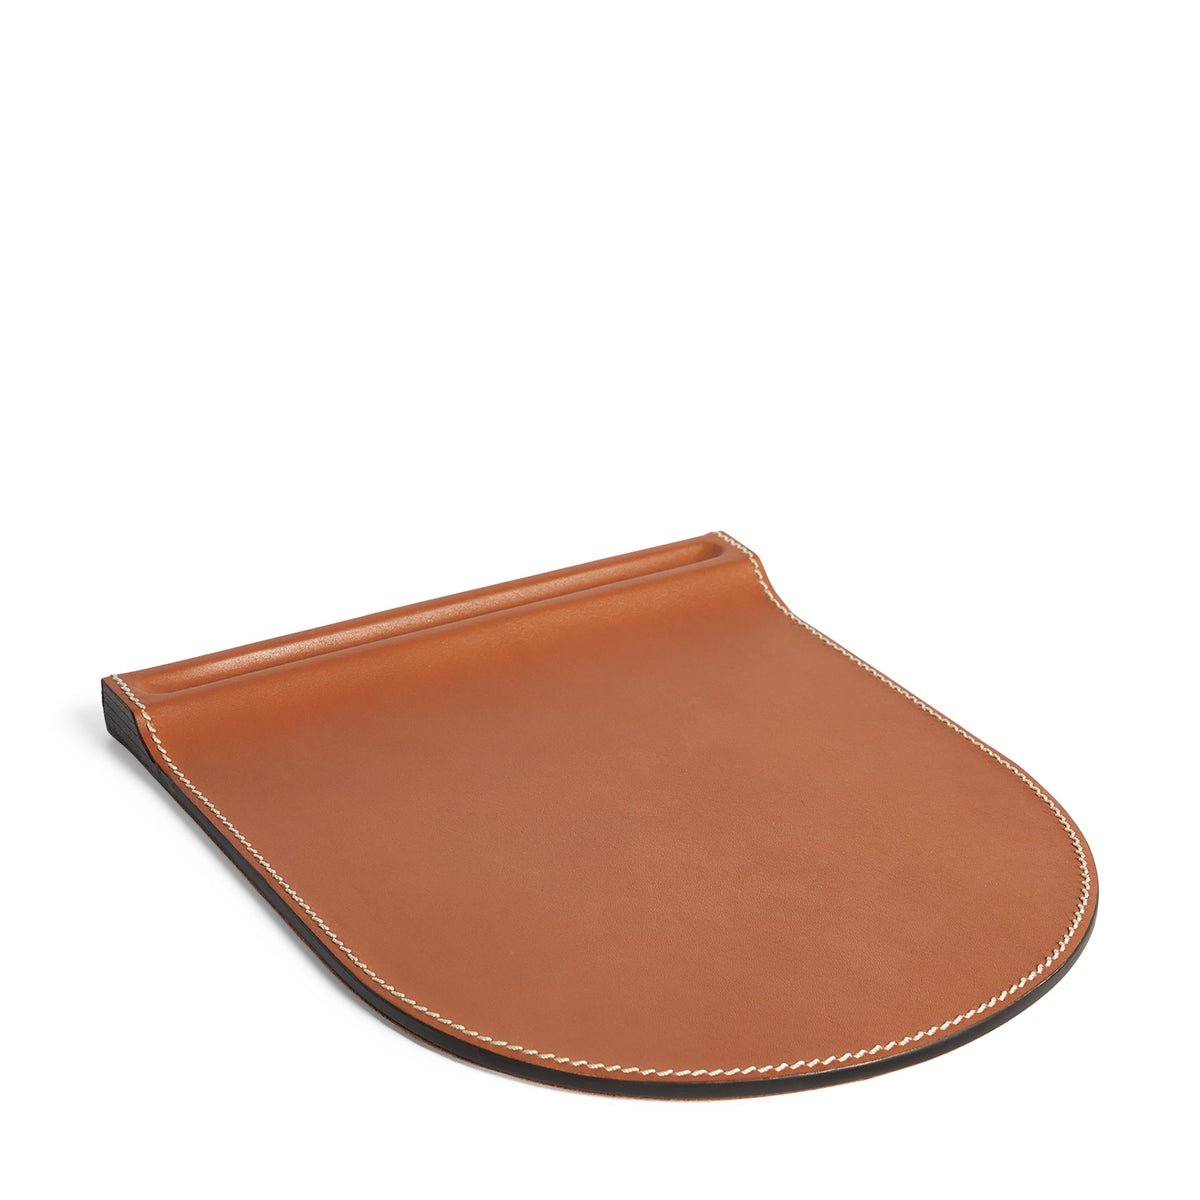 BRENNAN LEATHER MOUSE PAD SADDLE